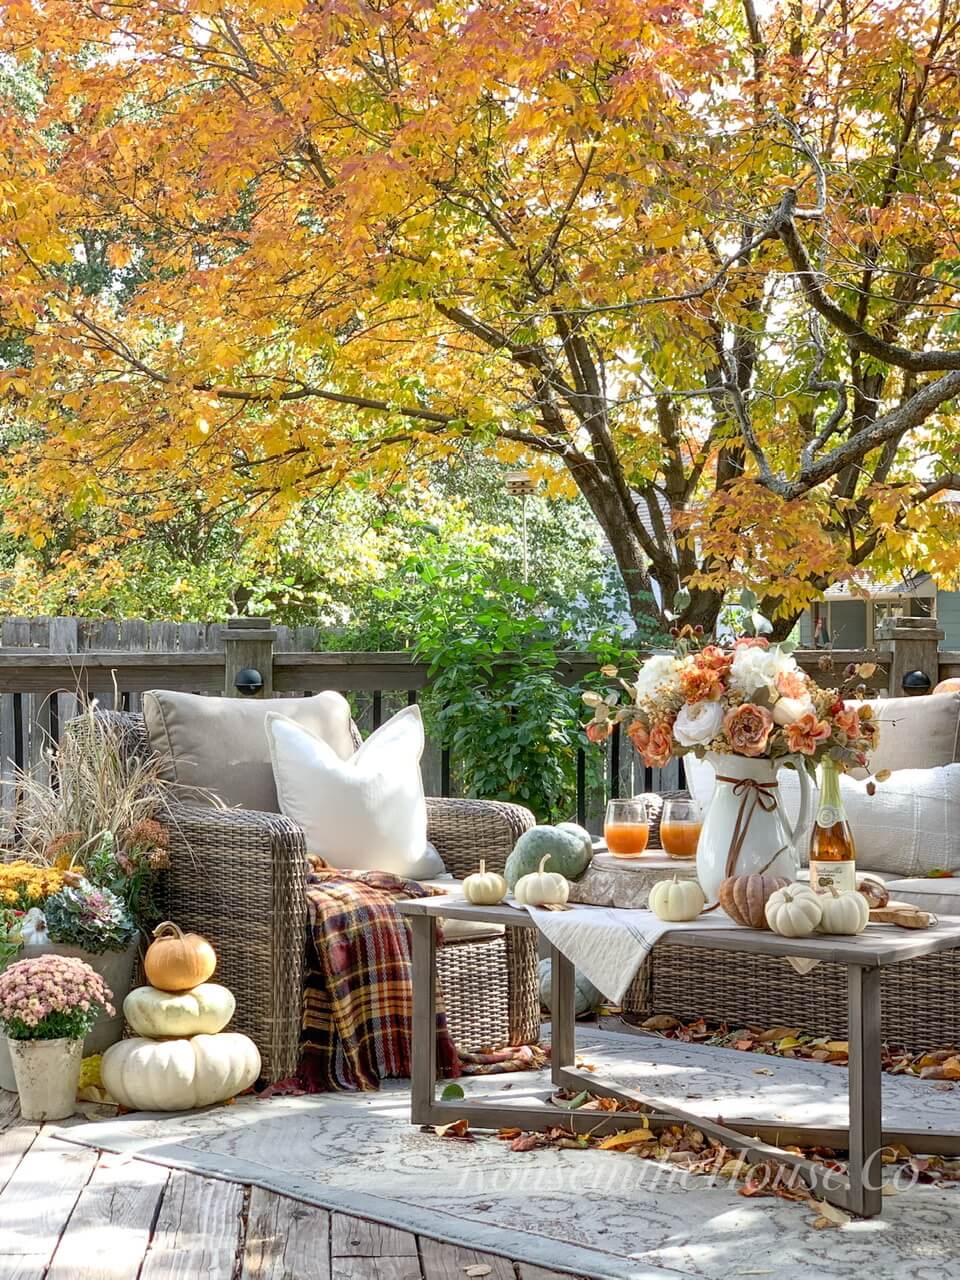 An outdoor space decorated for fall. Fall foliage is in the background.